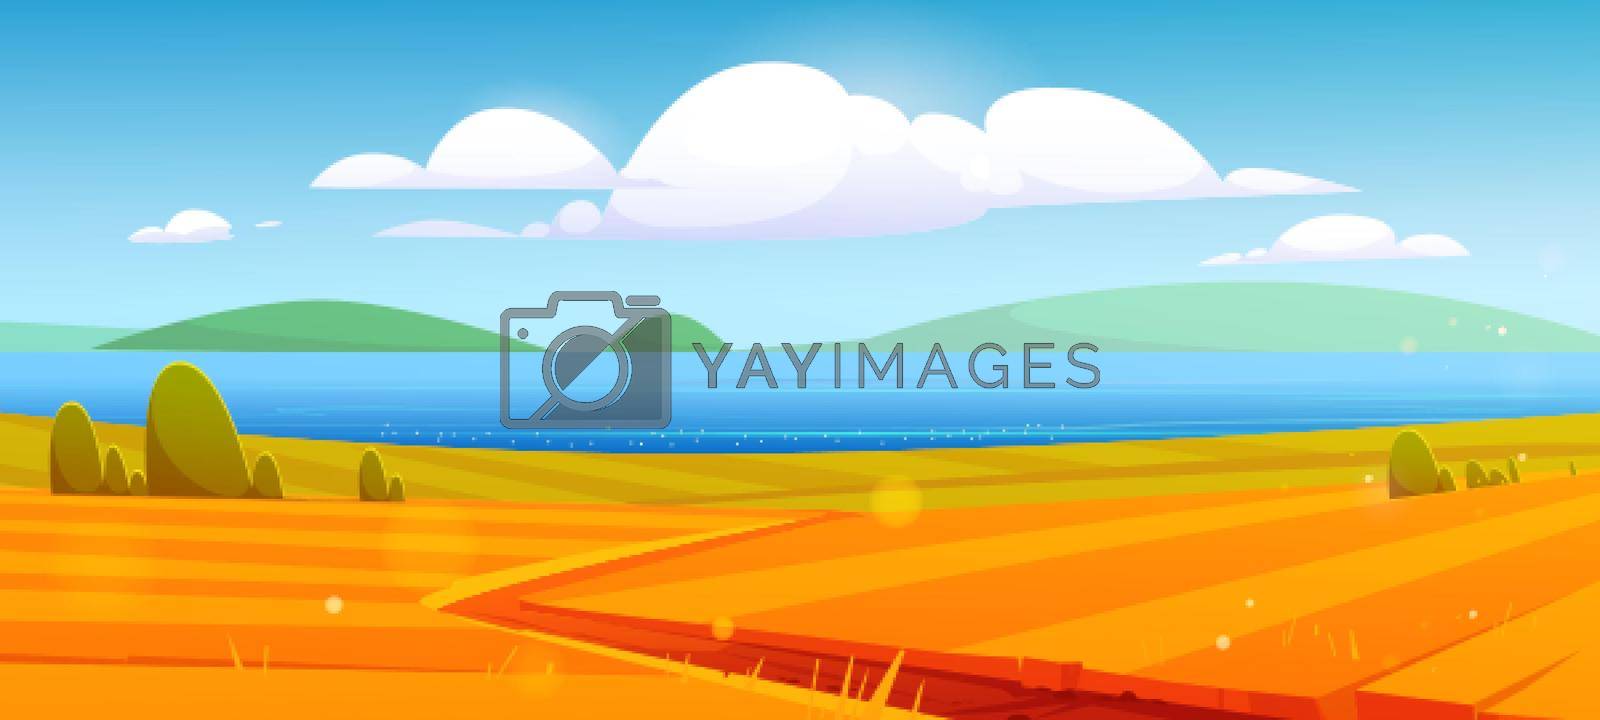 Royalty free image of Autumn nature landscape, rural dirt road, field by vectorart